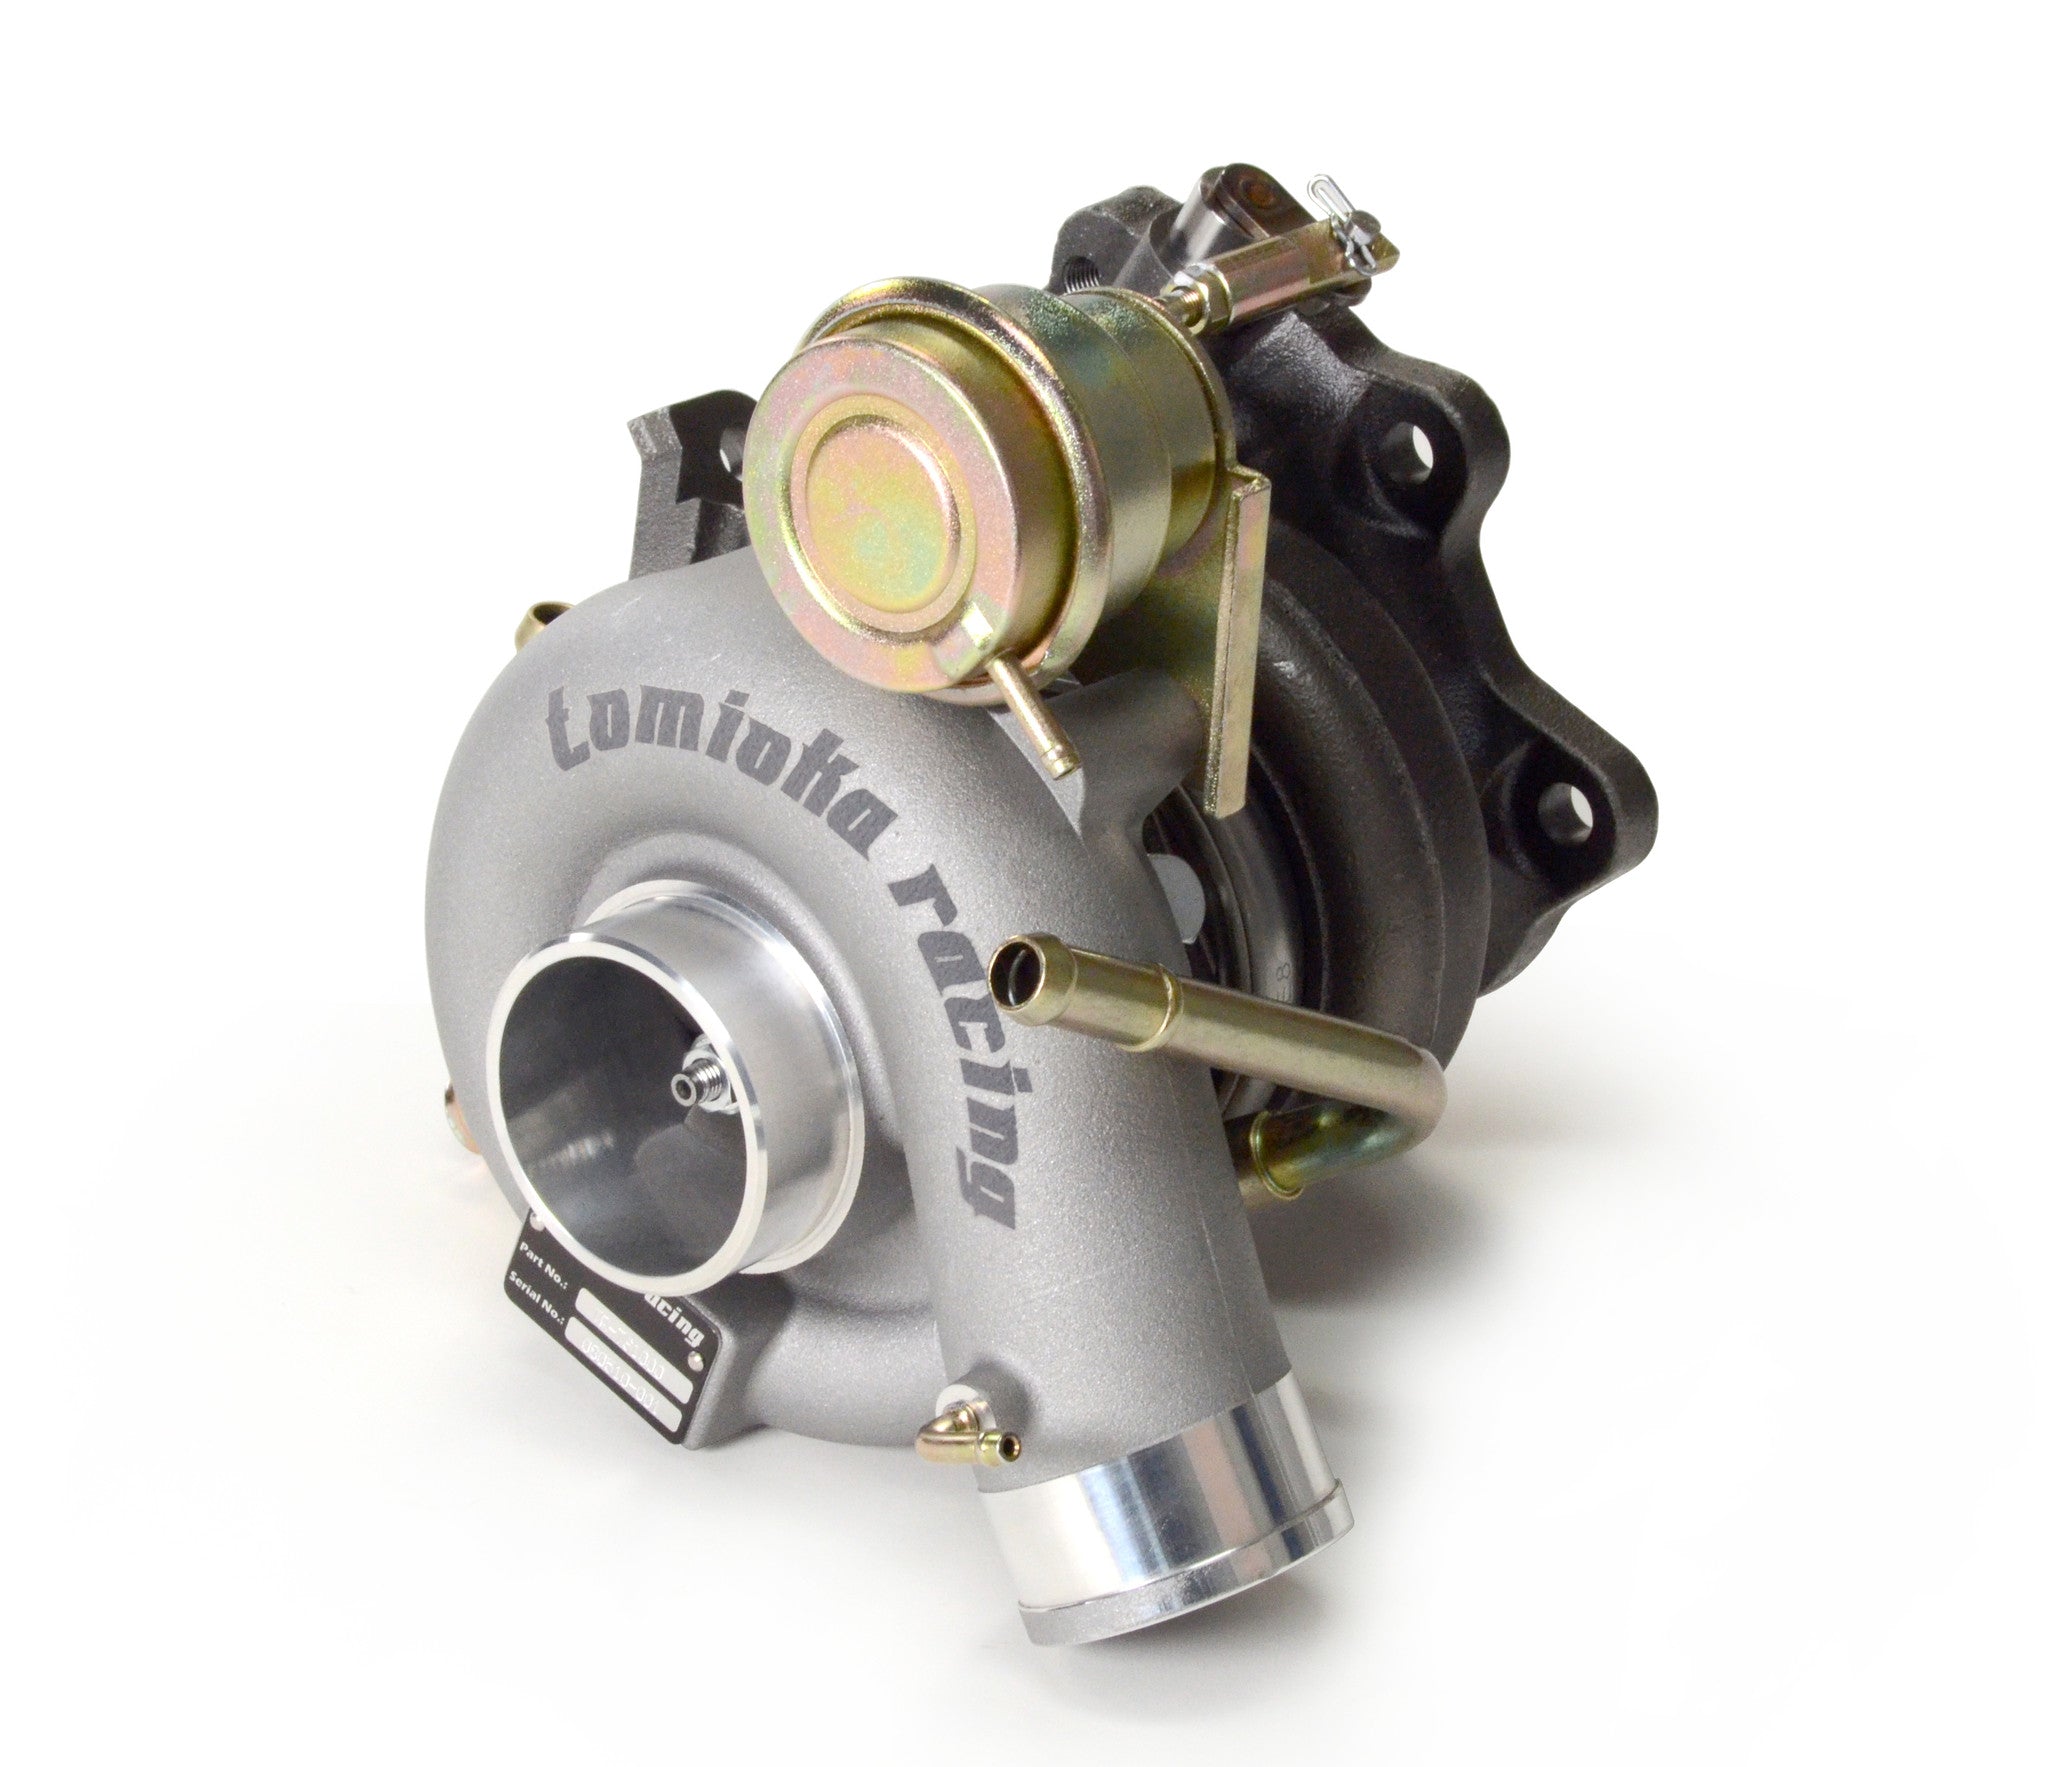 TR TD05-18G Turbo for Subaru WRX 2002-2007 and STI 2002-2010 w/ Billet Actuator and Motul 300V Power &  Competition